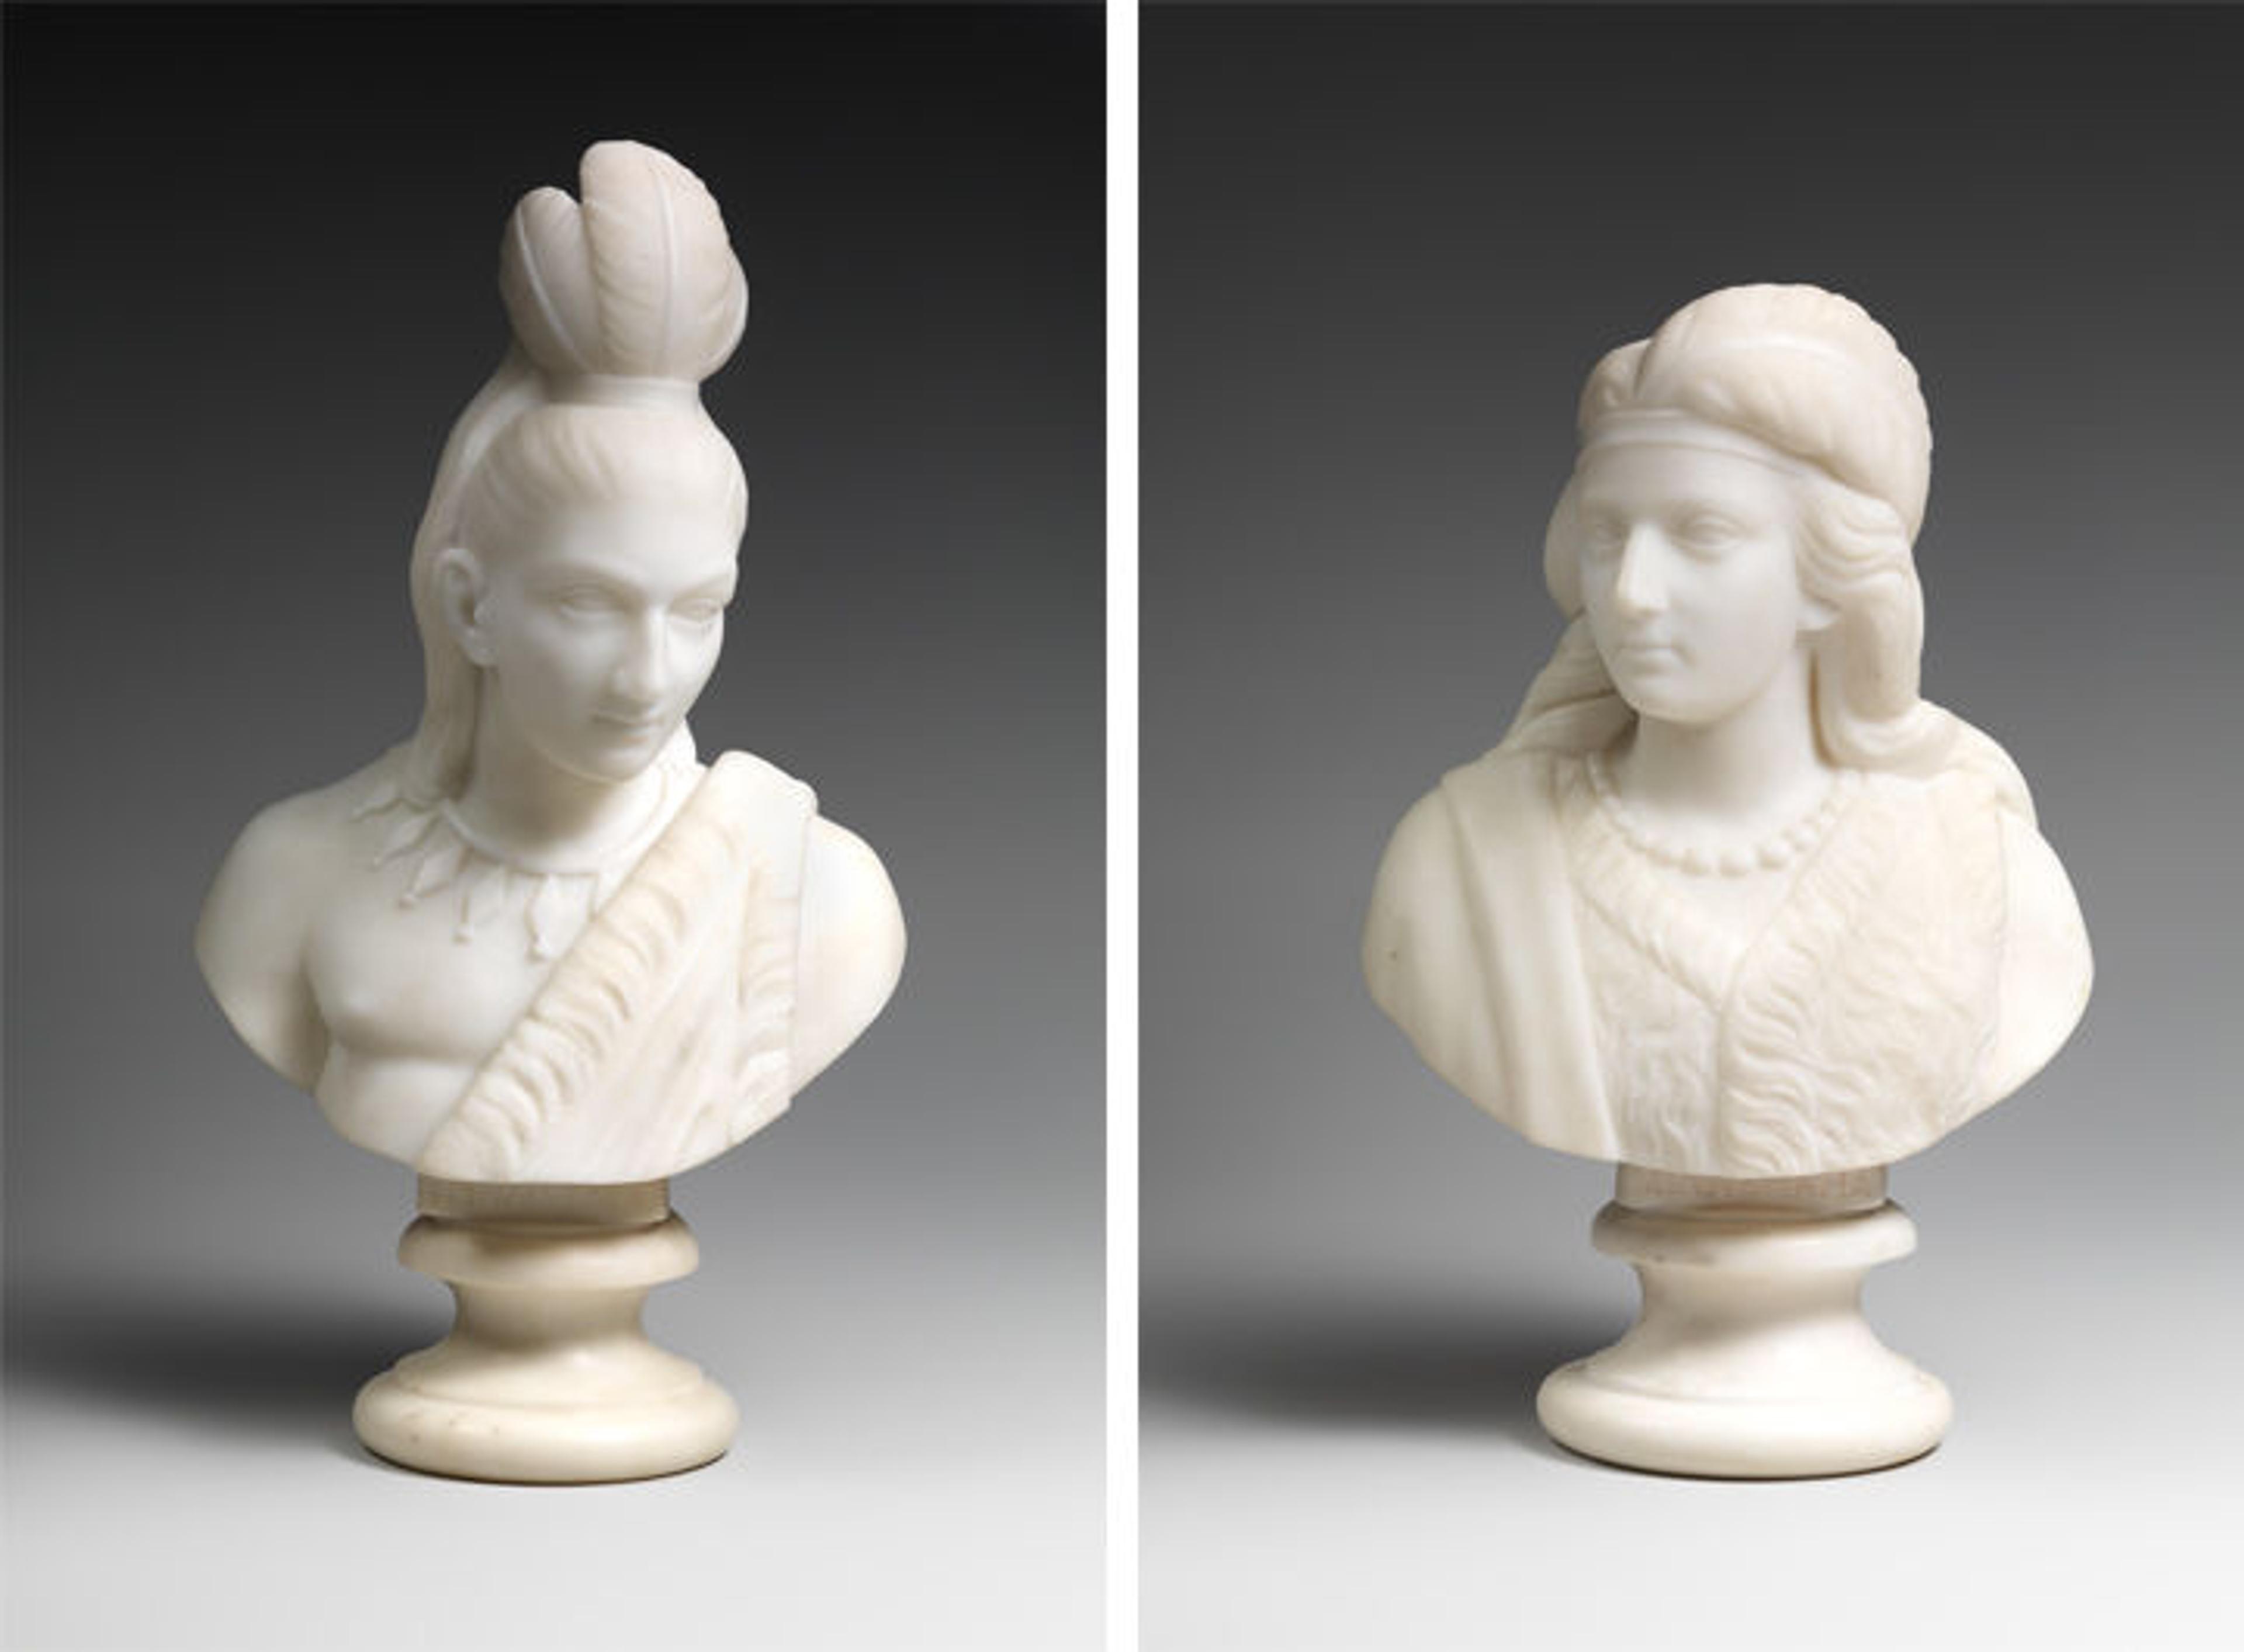 Two white marble busts show Hiawatha and Minnehaha based on Longfellow's poem, The Song of Hiawatha.